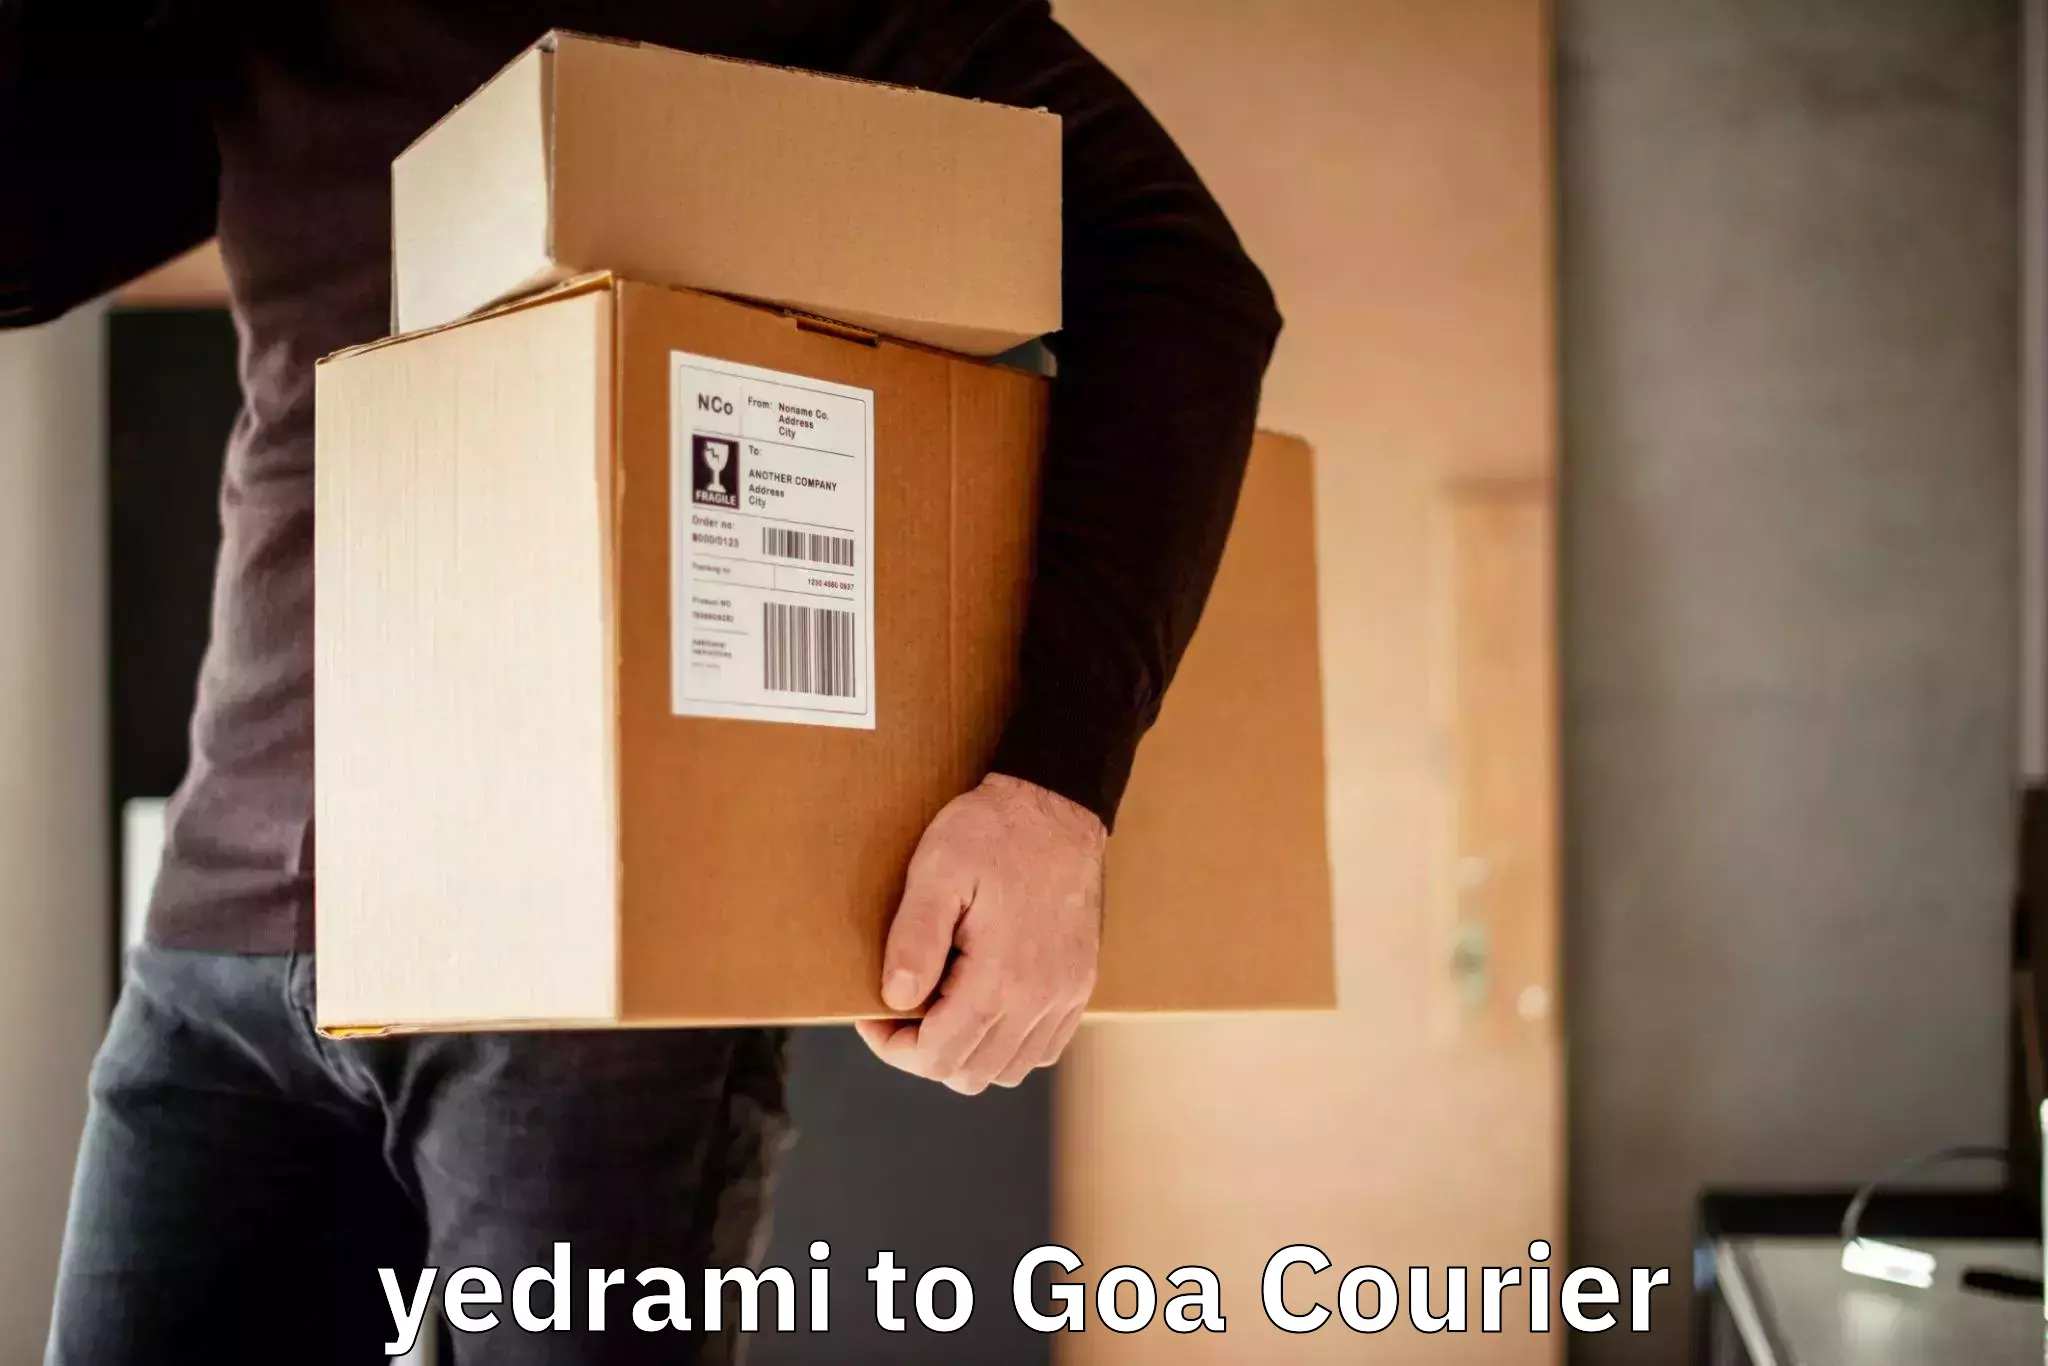 24-hour courier service yedrami to Goa